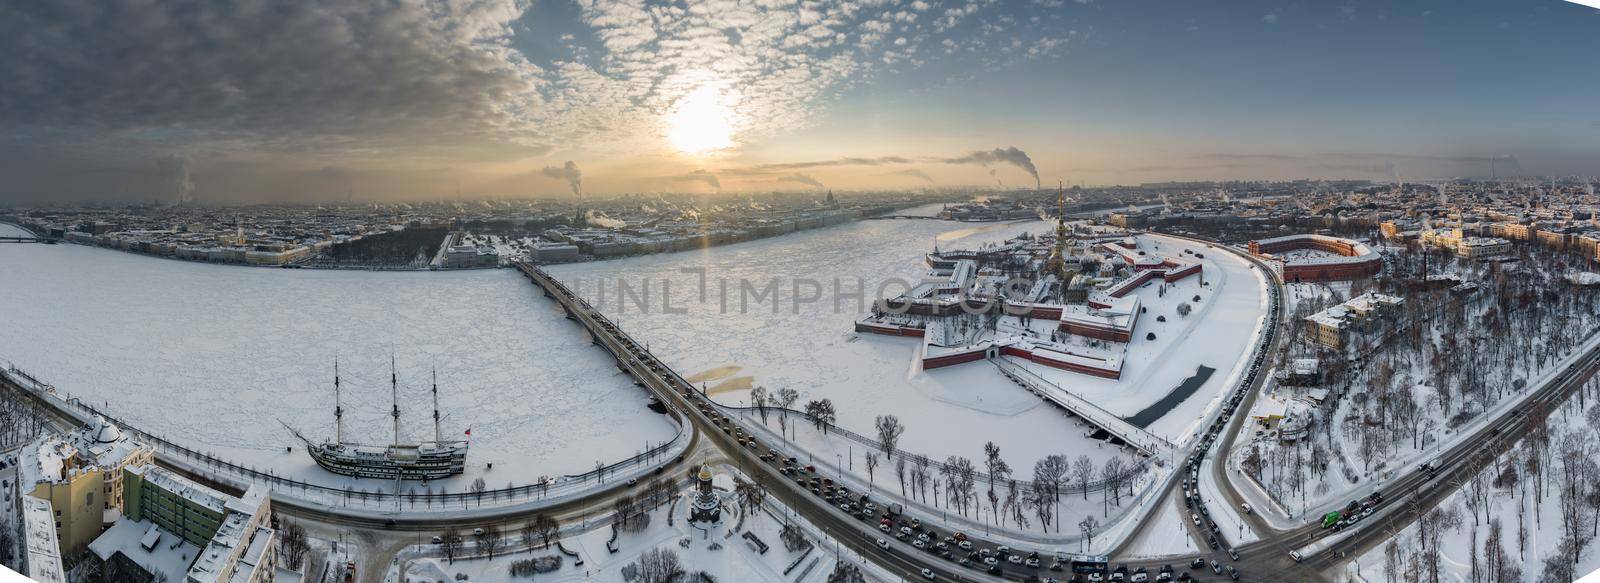 Drone point of view of winter St. Petersburg at sunset, frozen Neva river, steam over city, Peter and Paul fortress, car traffic on Trinity bridge, rostral columns, Palace drawbridge, panoramic view. High quality photo